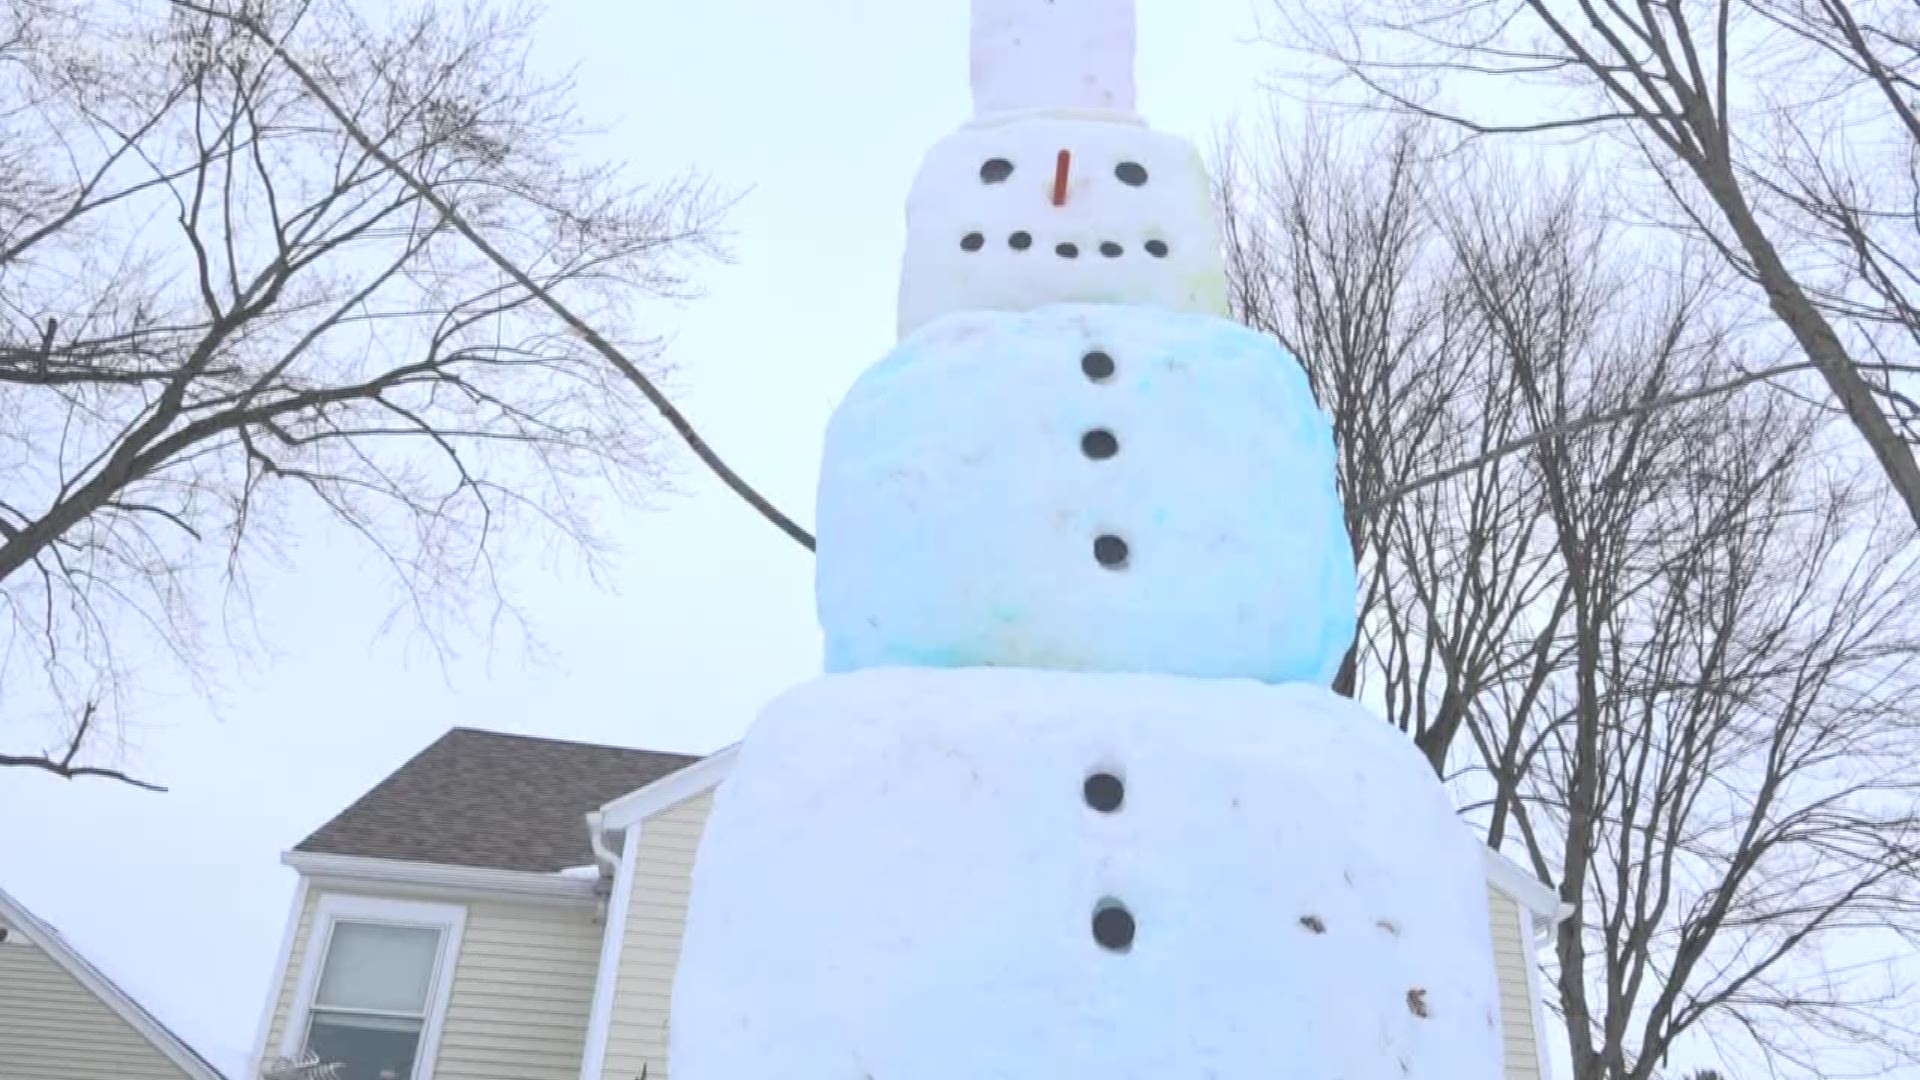 A local family spent five hours building a 14-foot snowman in Coopersville.